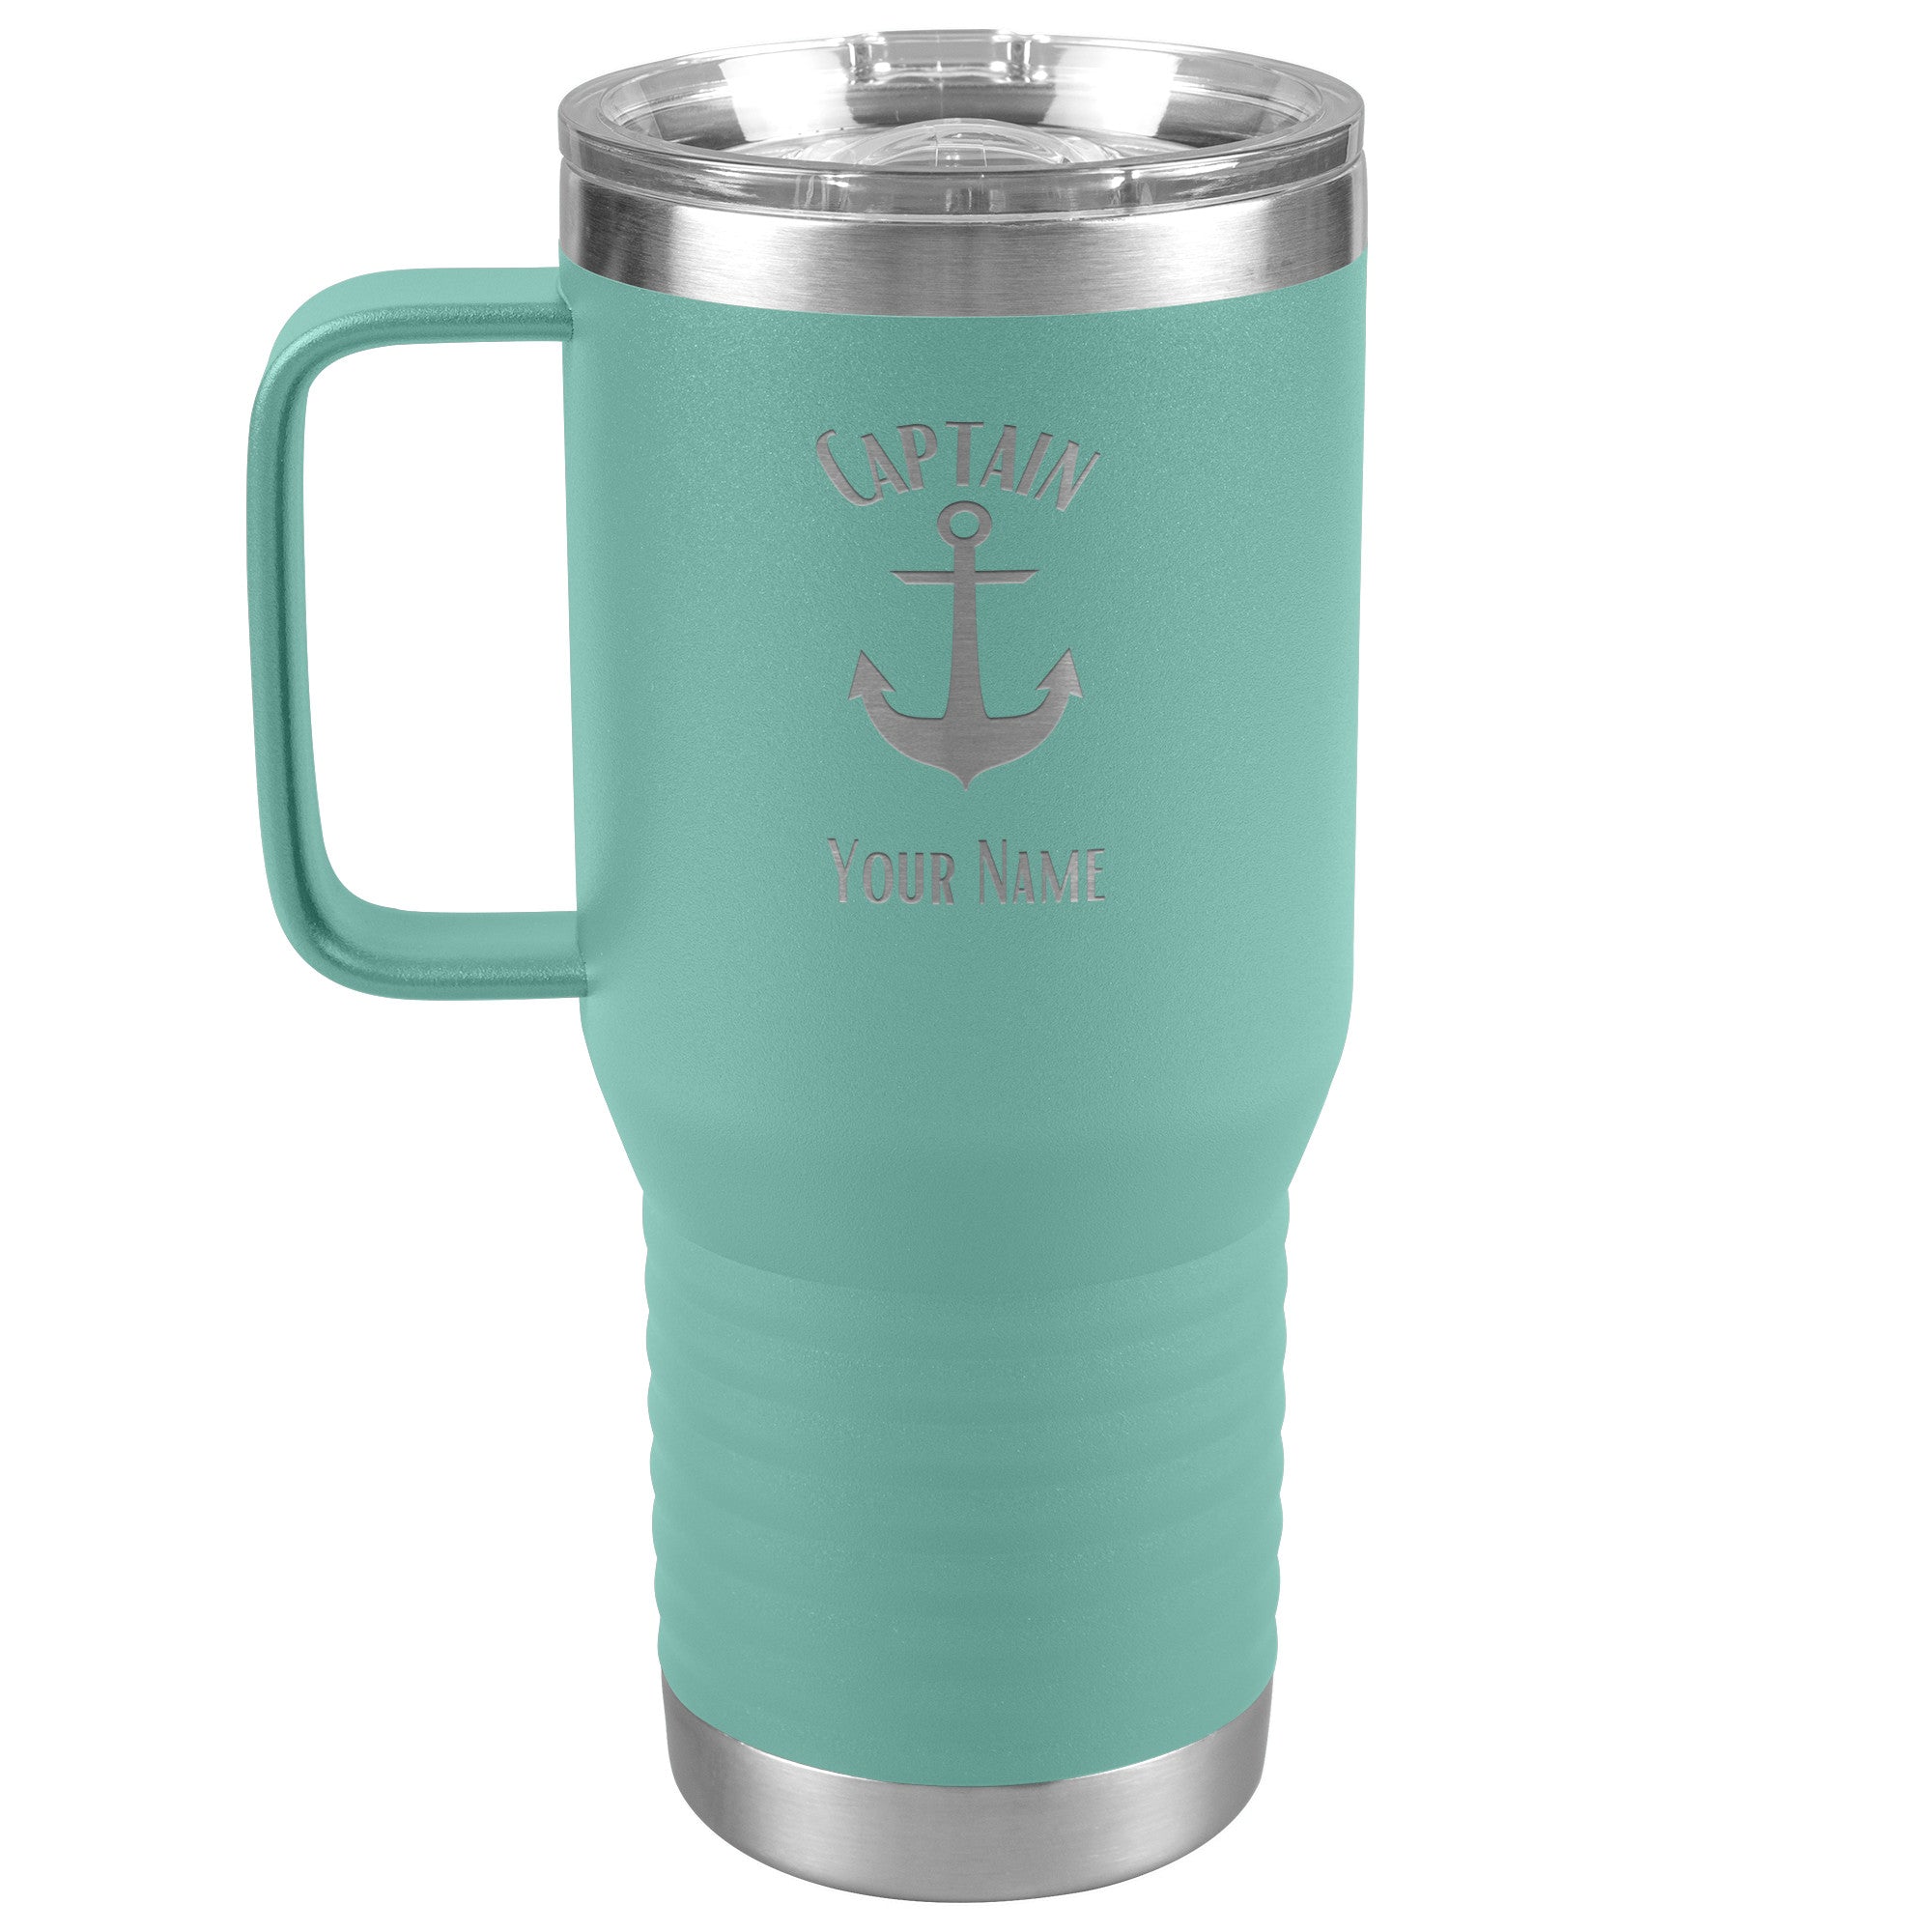 Boat Gifts, Nautical Gifts, Boat Tumbler, Personalized, Boating Gifts, Boat  Cup, Boating Tumbler with handle, Boat Accessories, Captain, Boat Owner